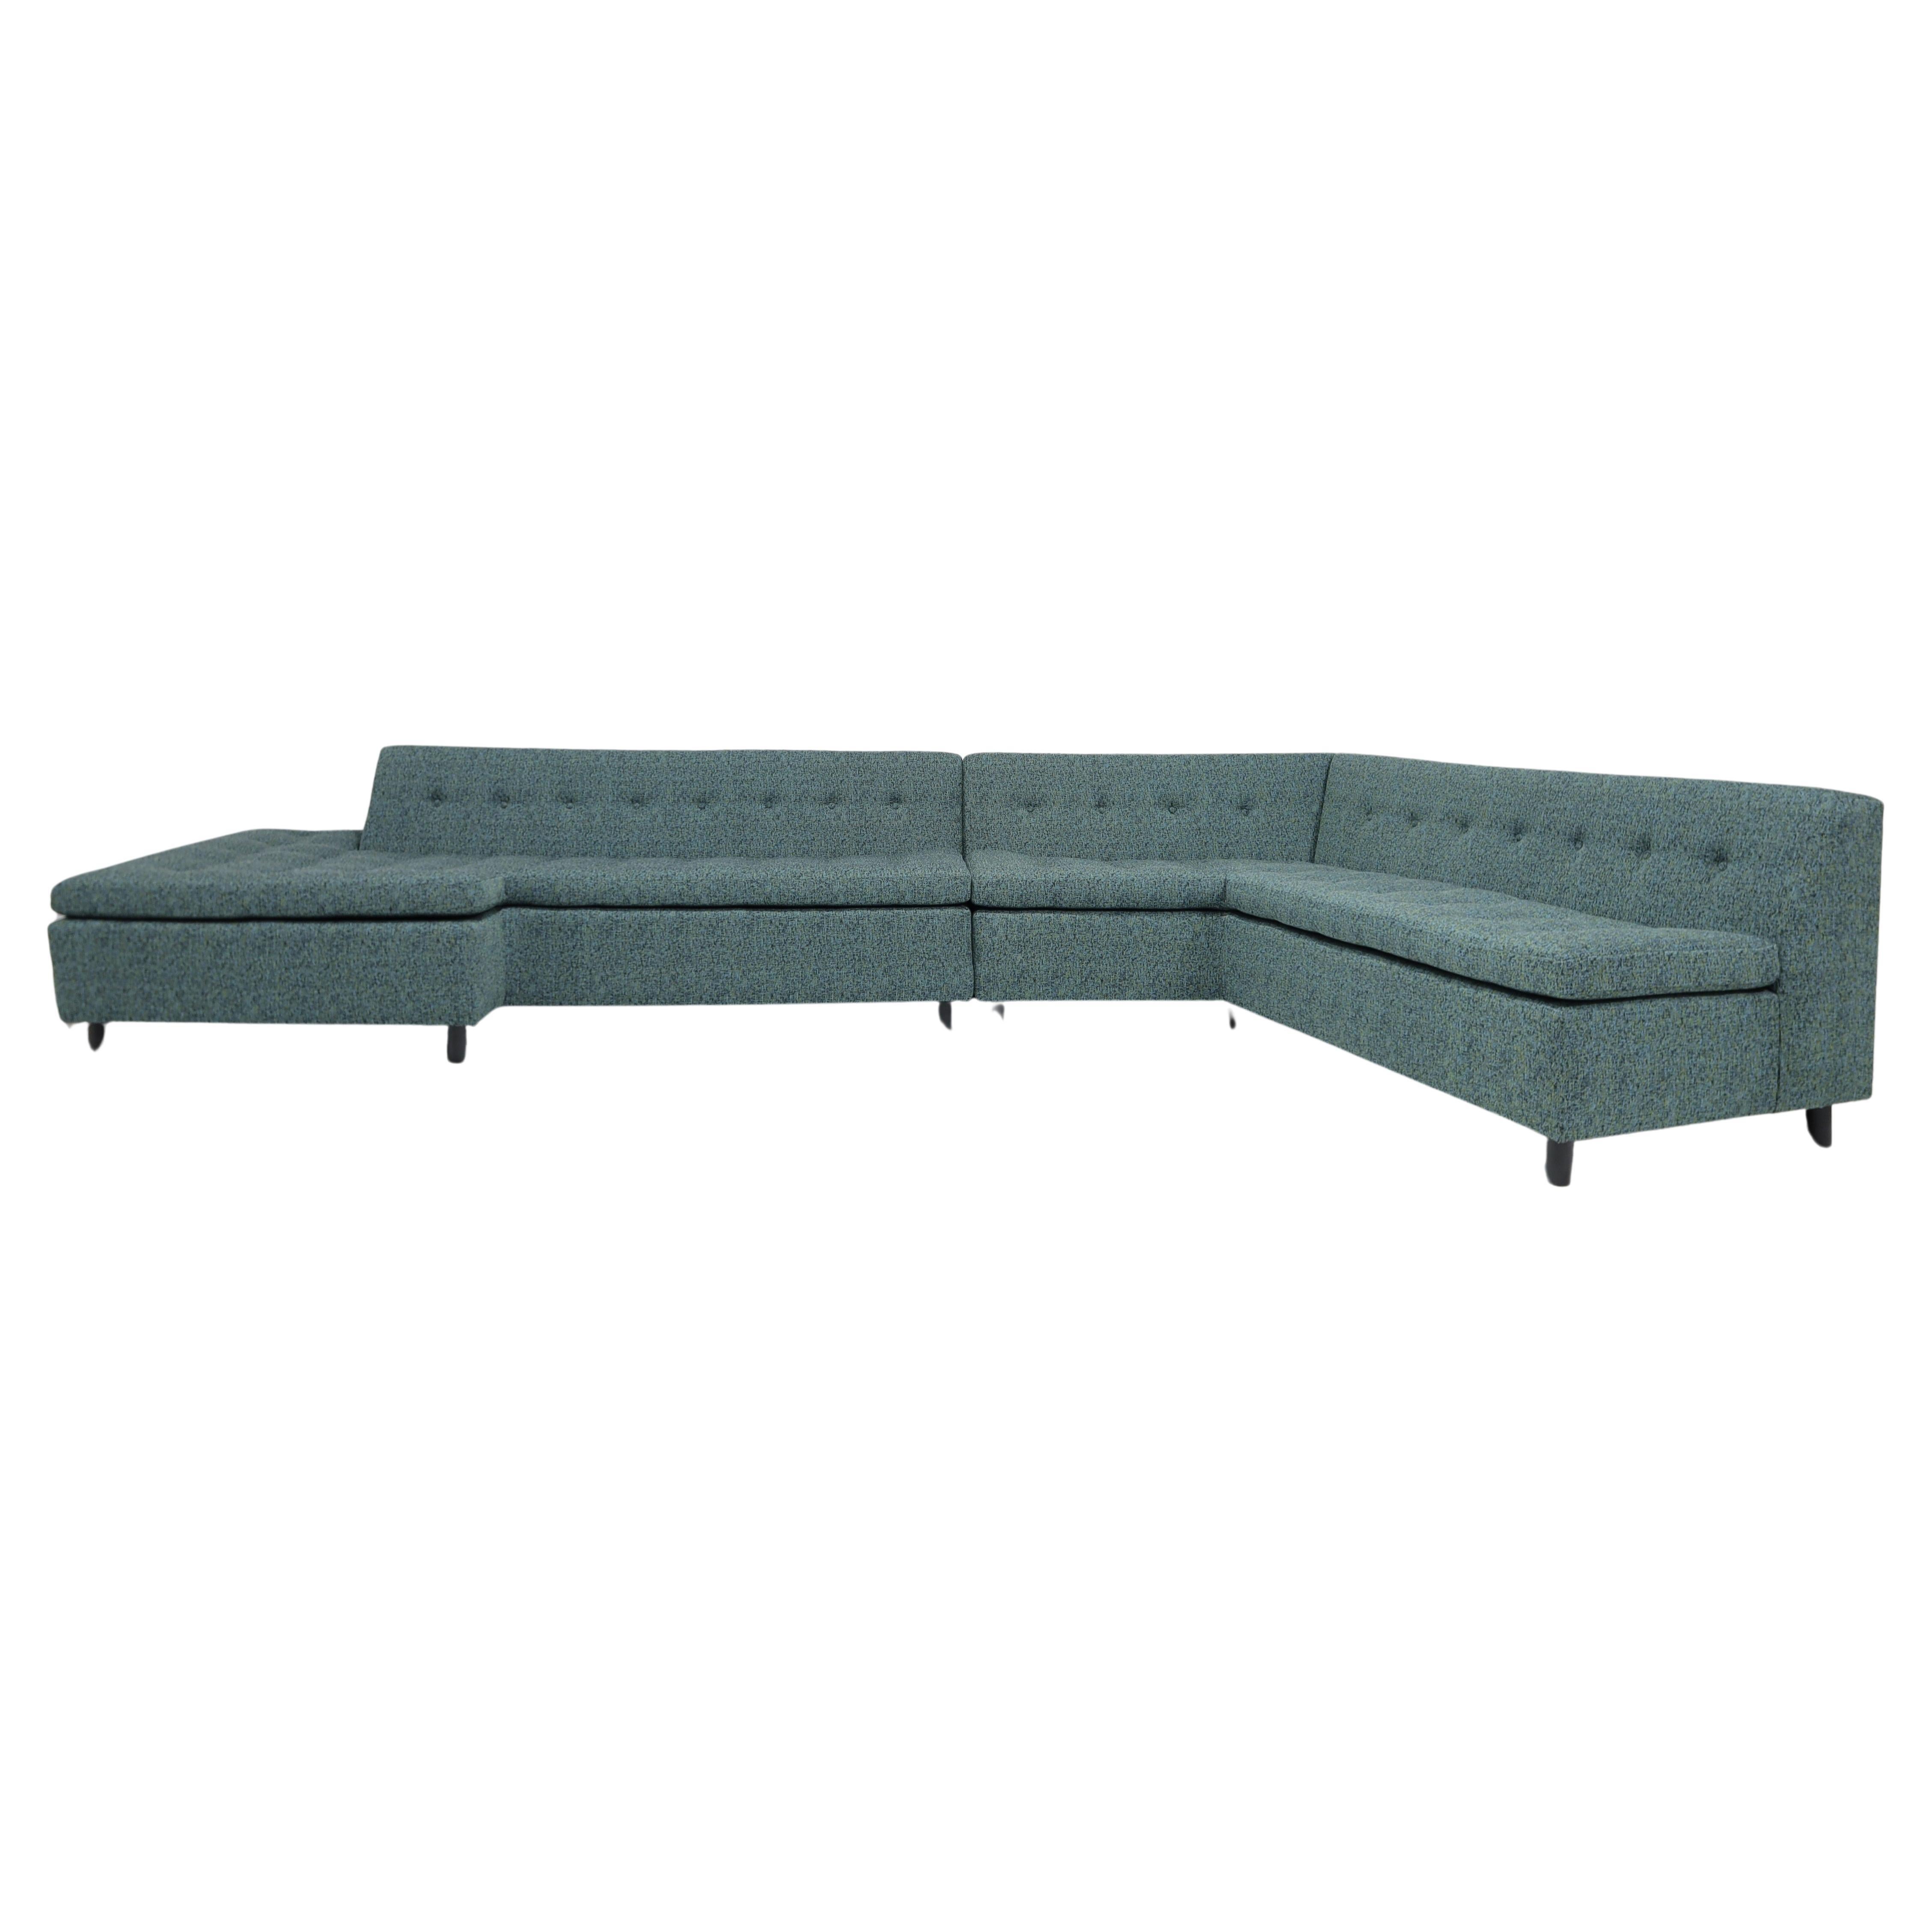 Harvey Probber Iconic Architectural Angle Sofa in Wool Upholstery For Sale